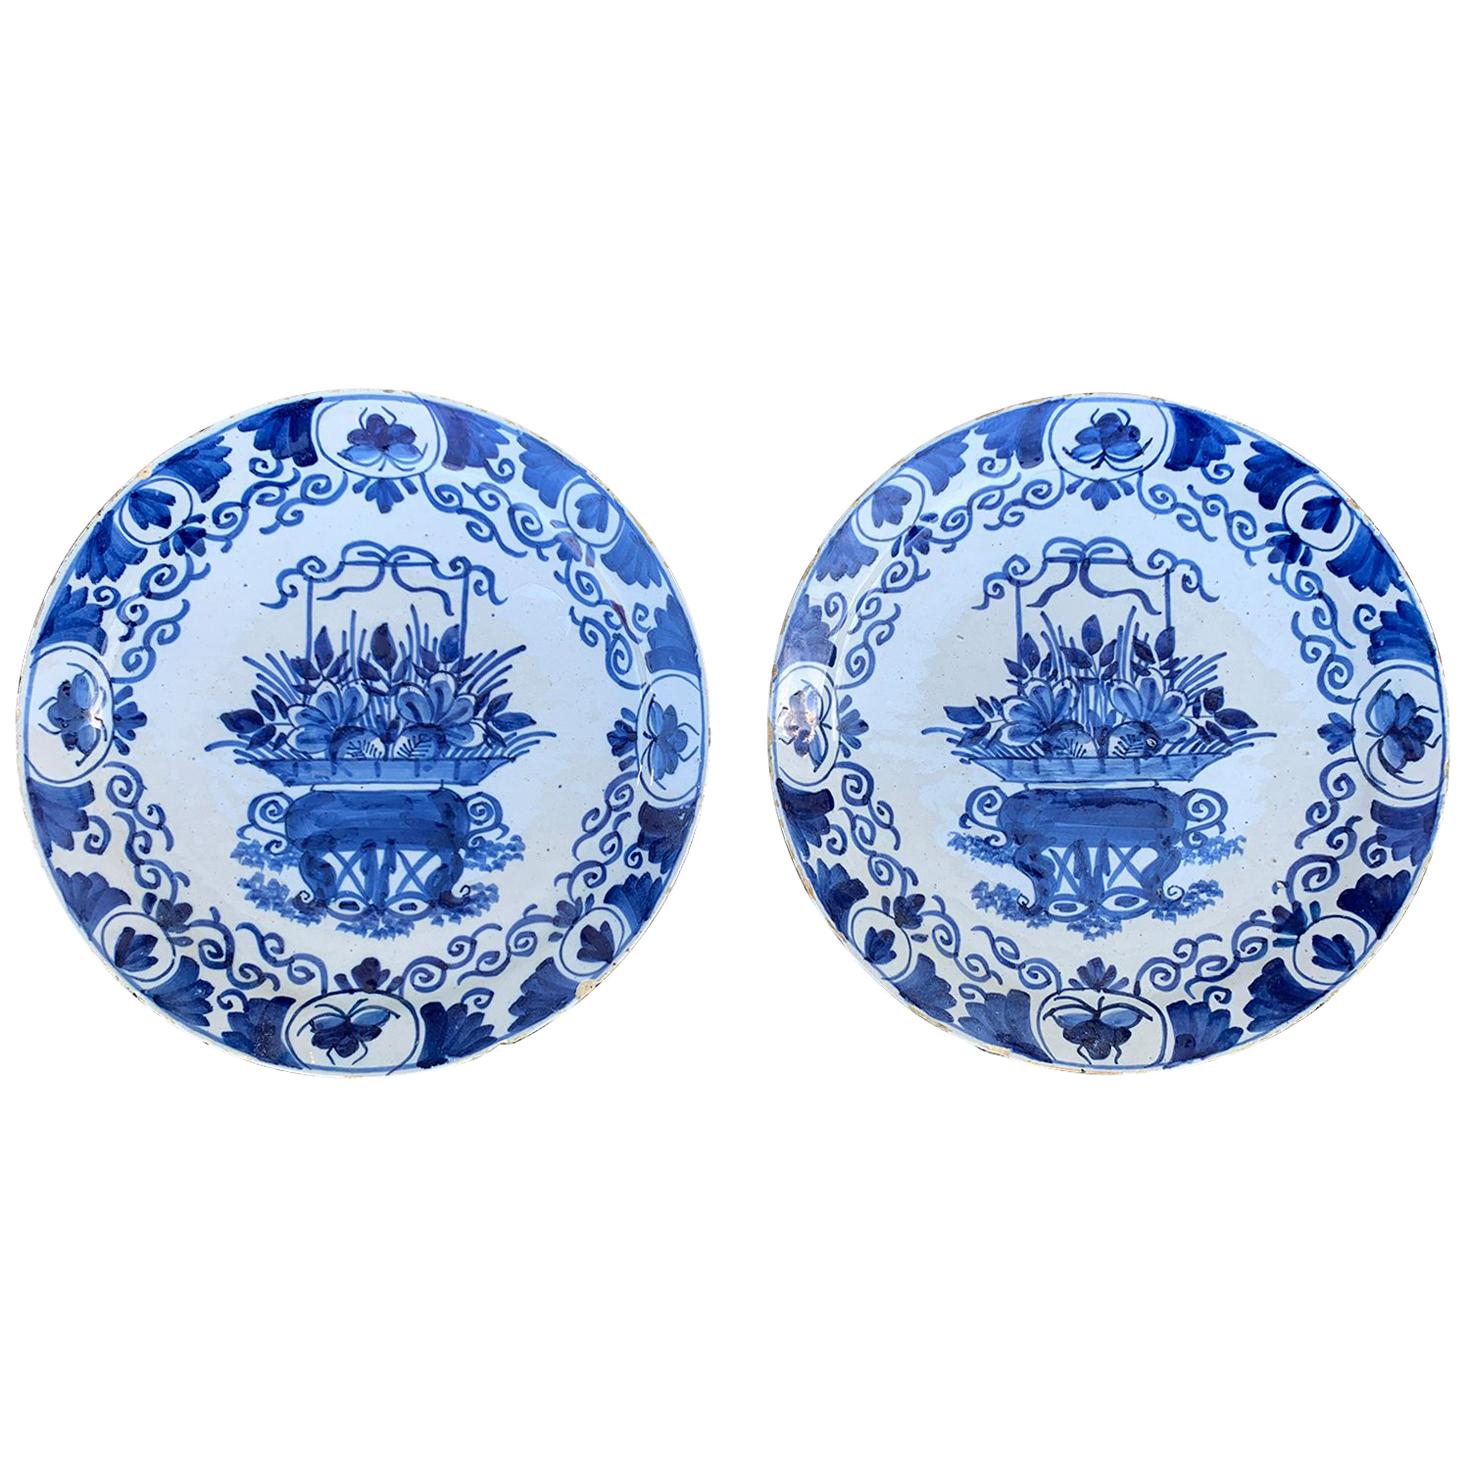 Pair of 18th Century Blue and White Porcelain Plates